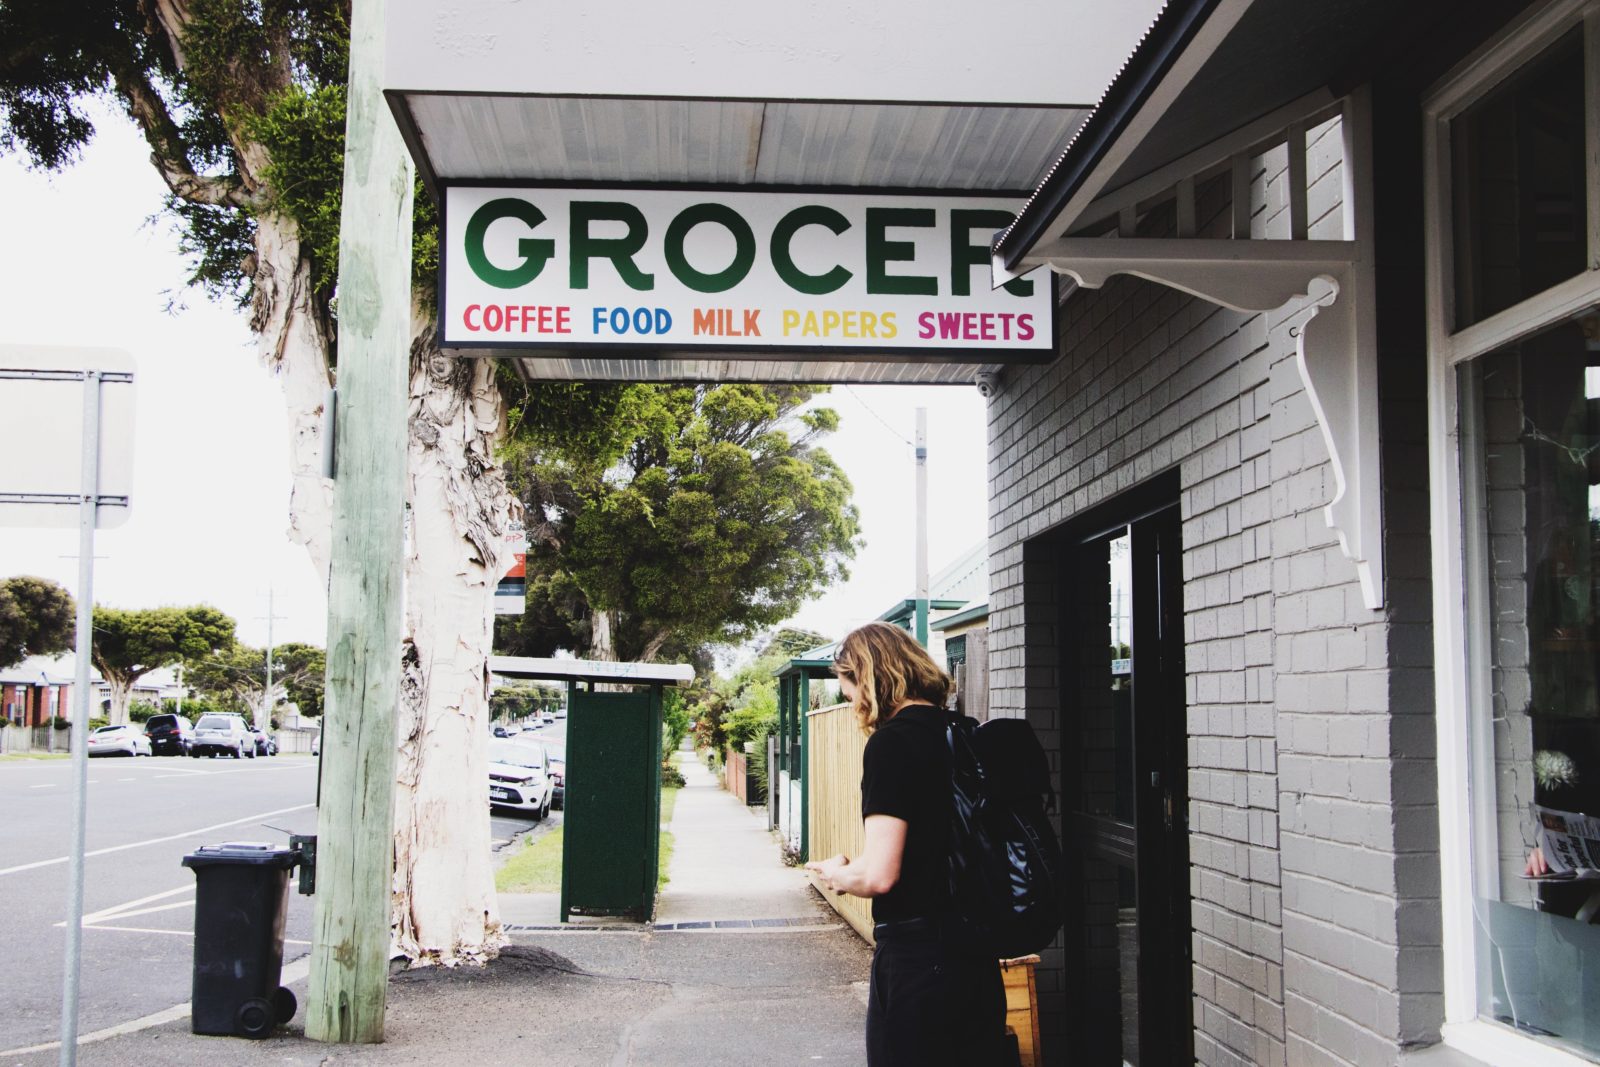 A customer waiting outside the corner store underneath a large sign that says 'GROCER'